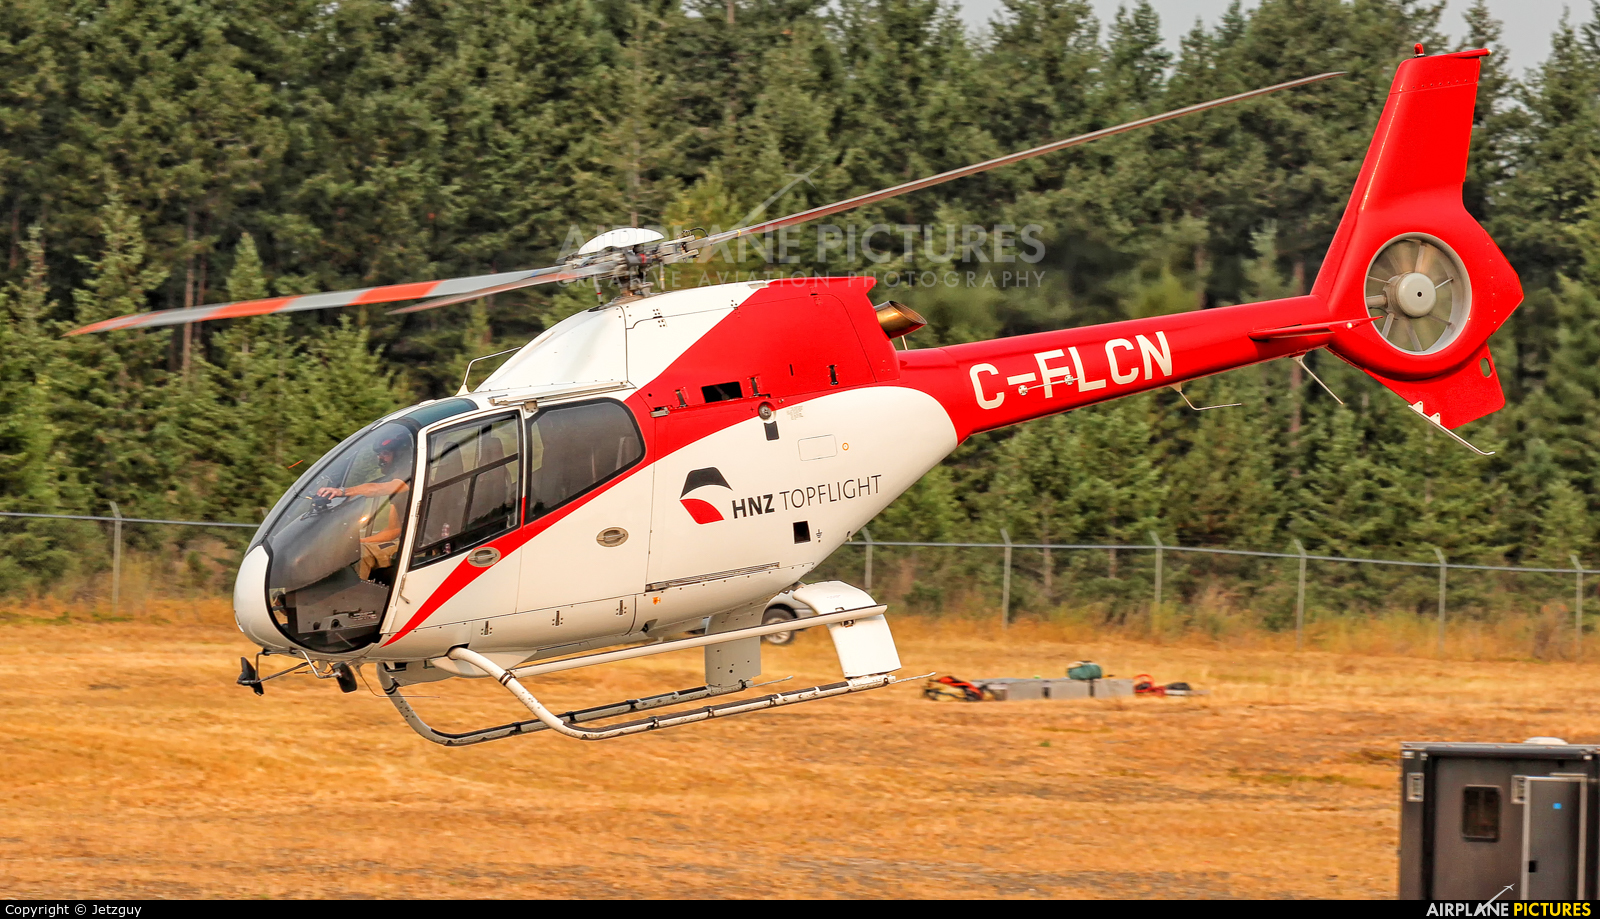 Canadian Helicopters C-FLCN aircraft at 108 Mile Ranch, BC